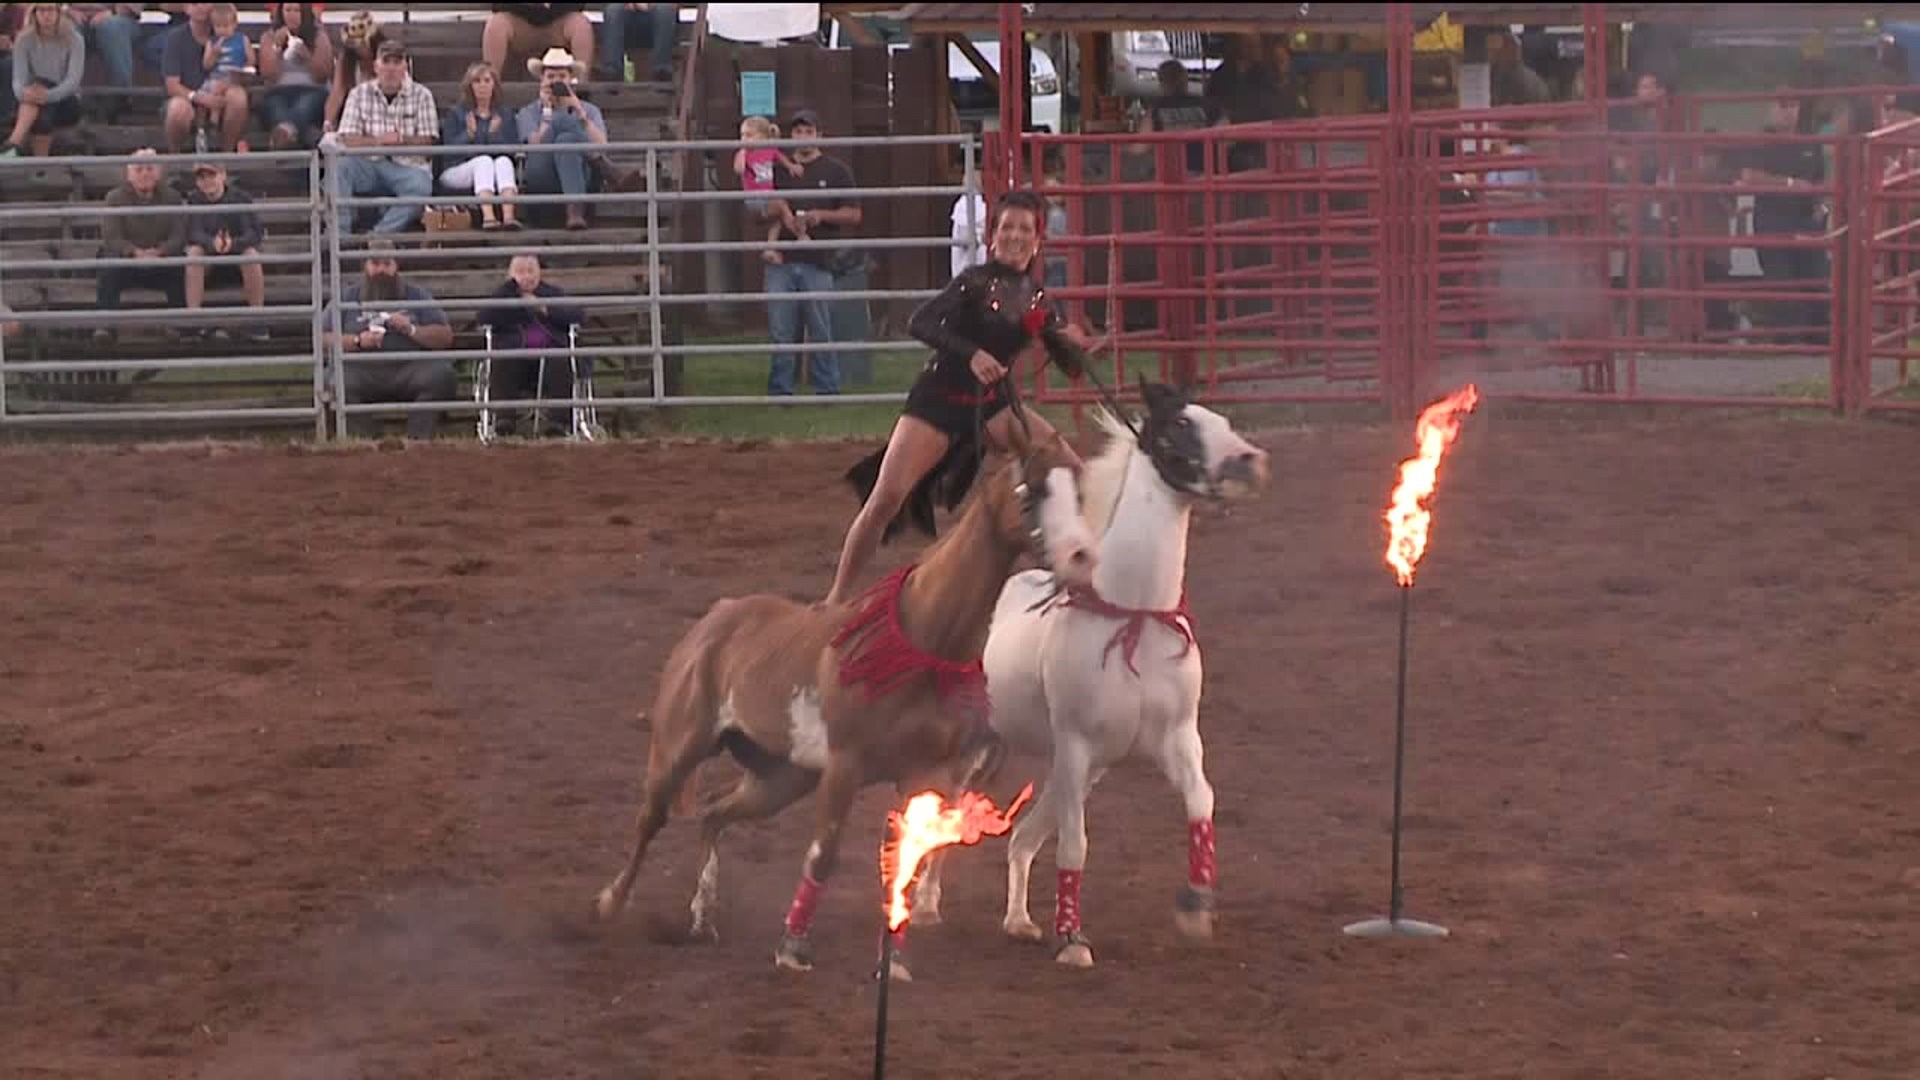 34th Year For The Benton Championship Rodeo In Columbia County